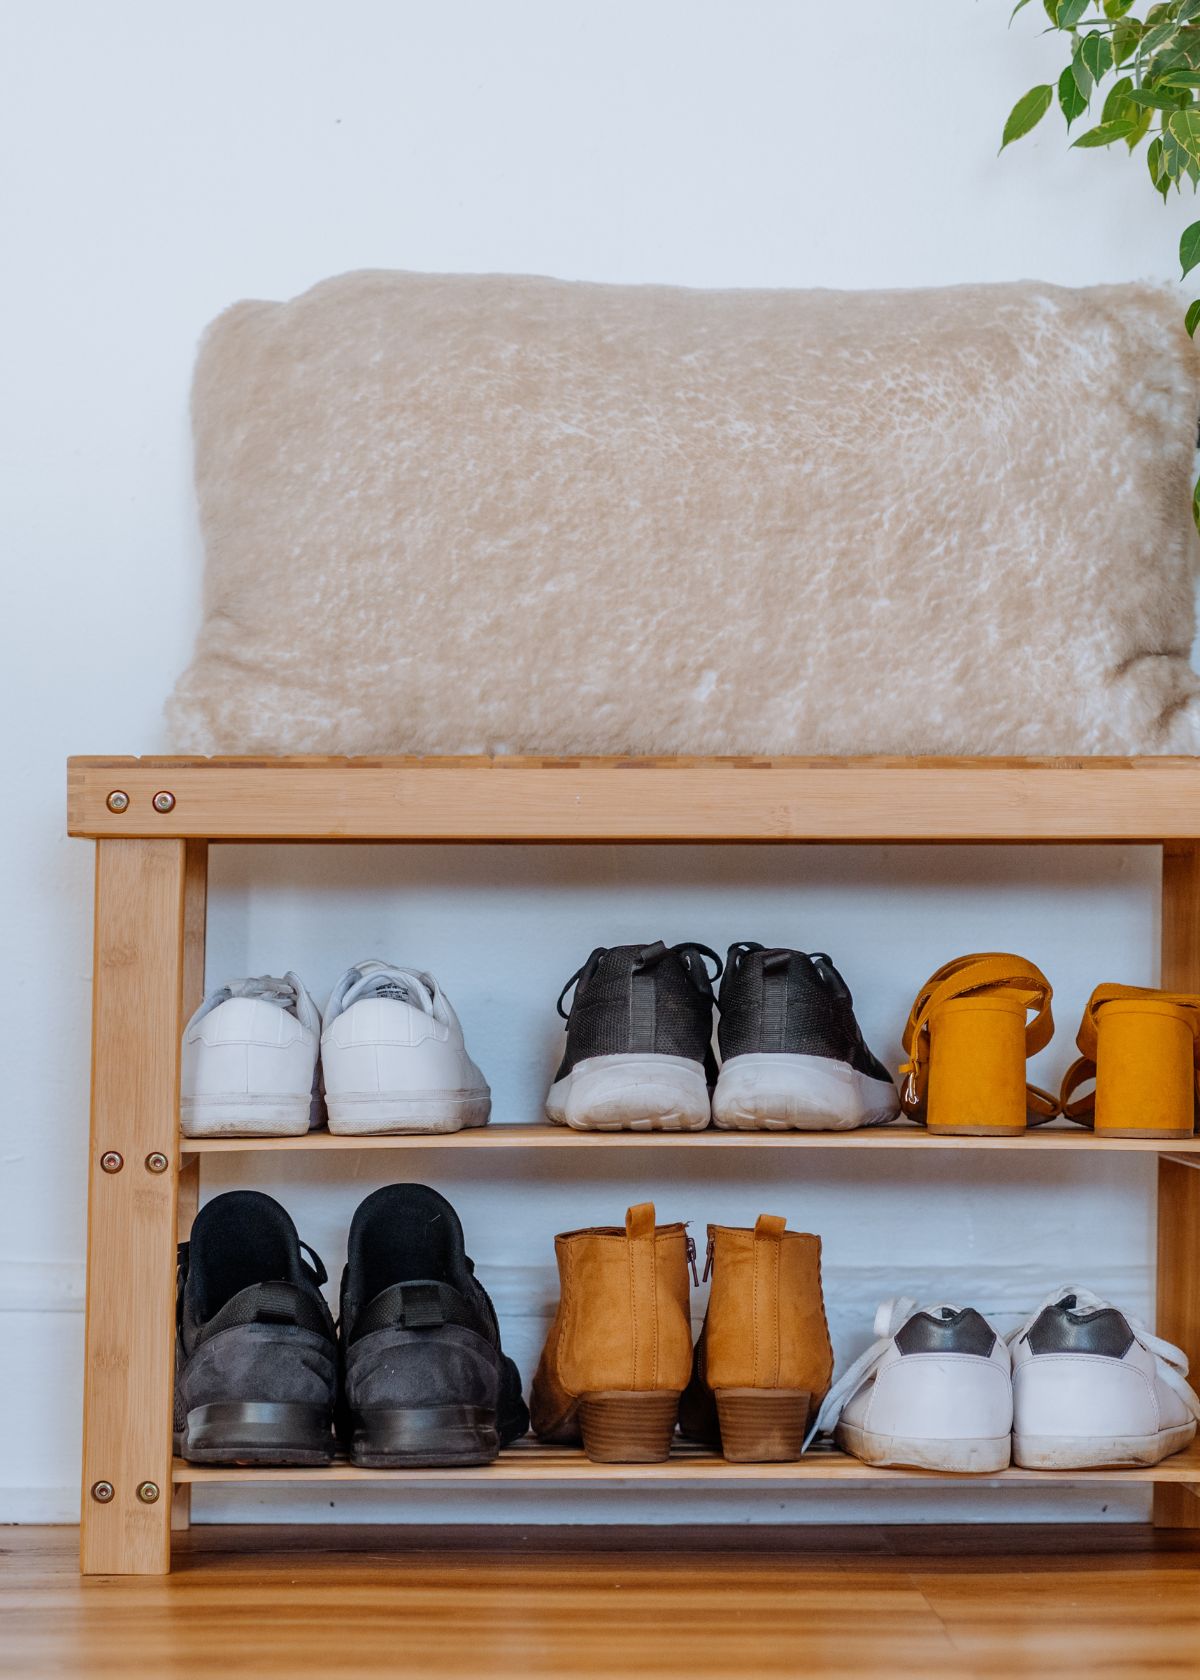 16 Clever Ways to Organize Shoes